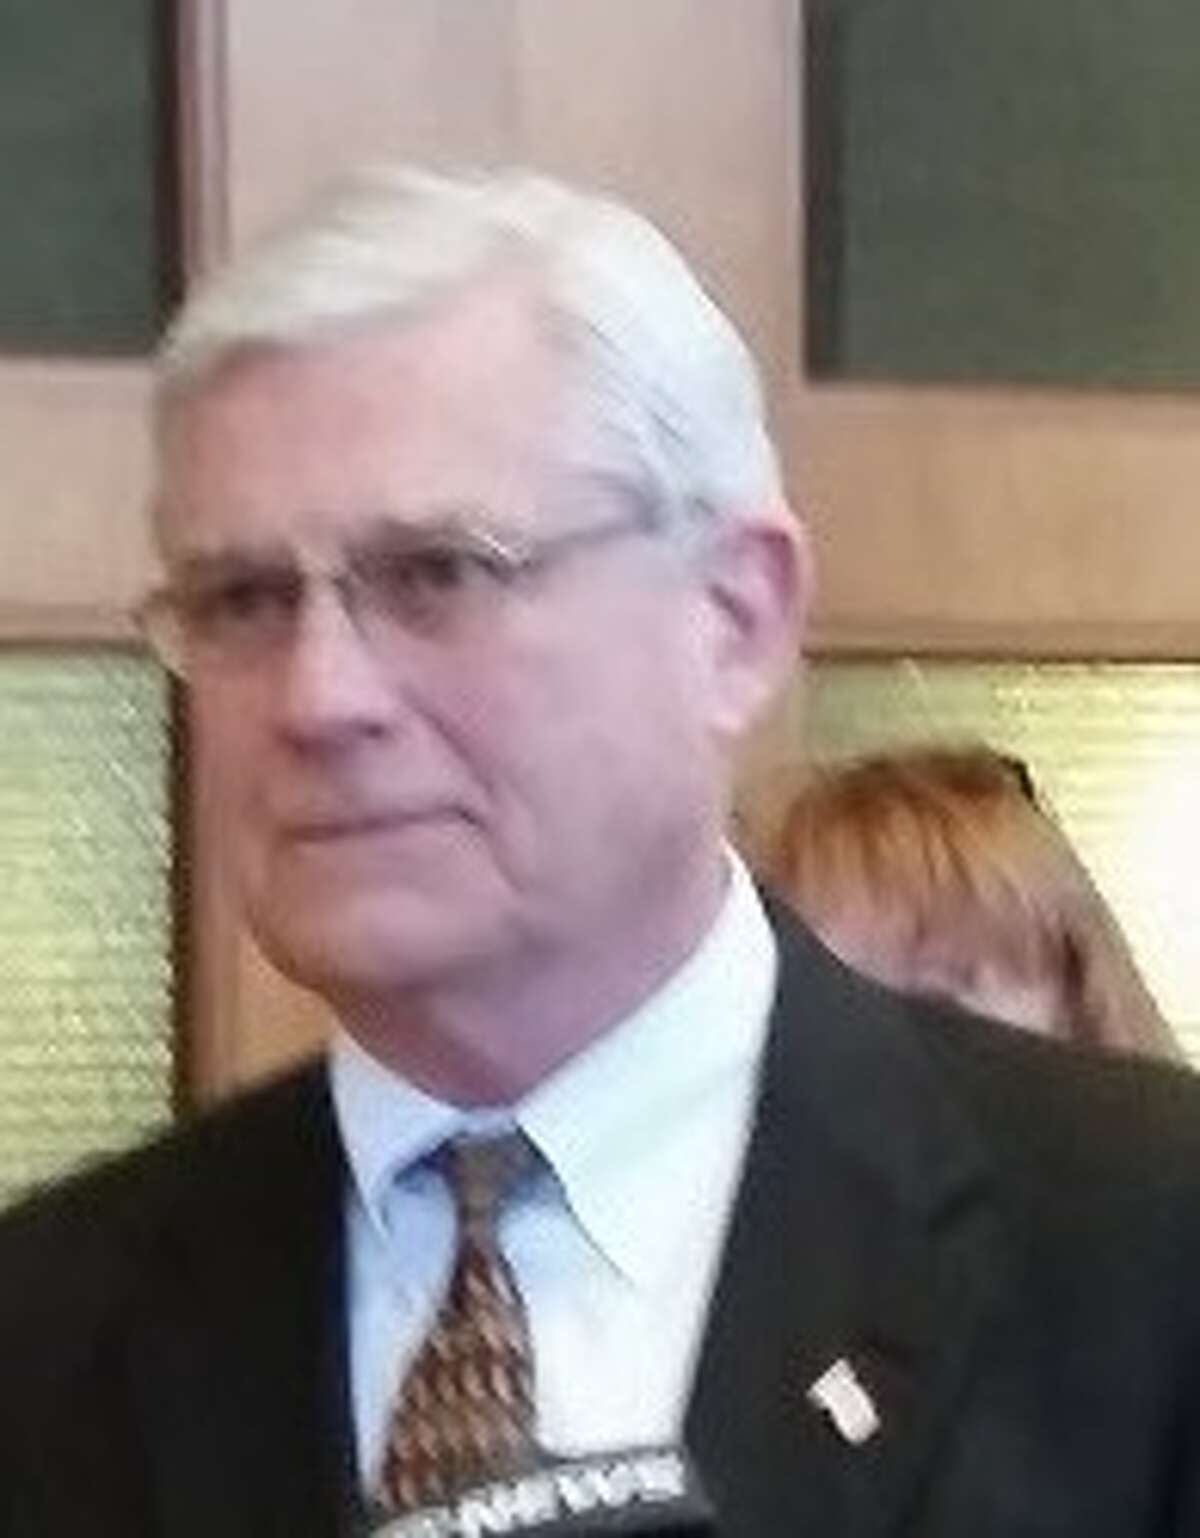 Republican candidate for Saratoga Springs mayor John Safford (Times Union)